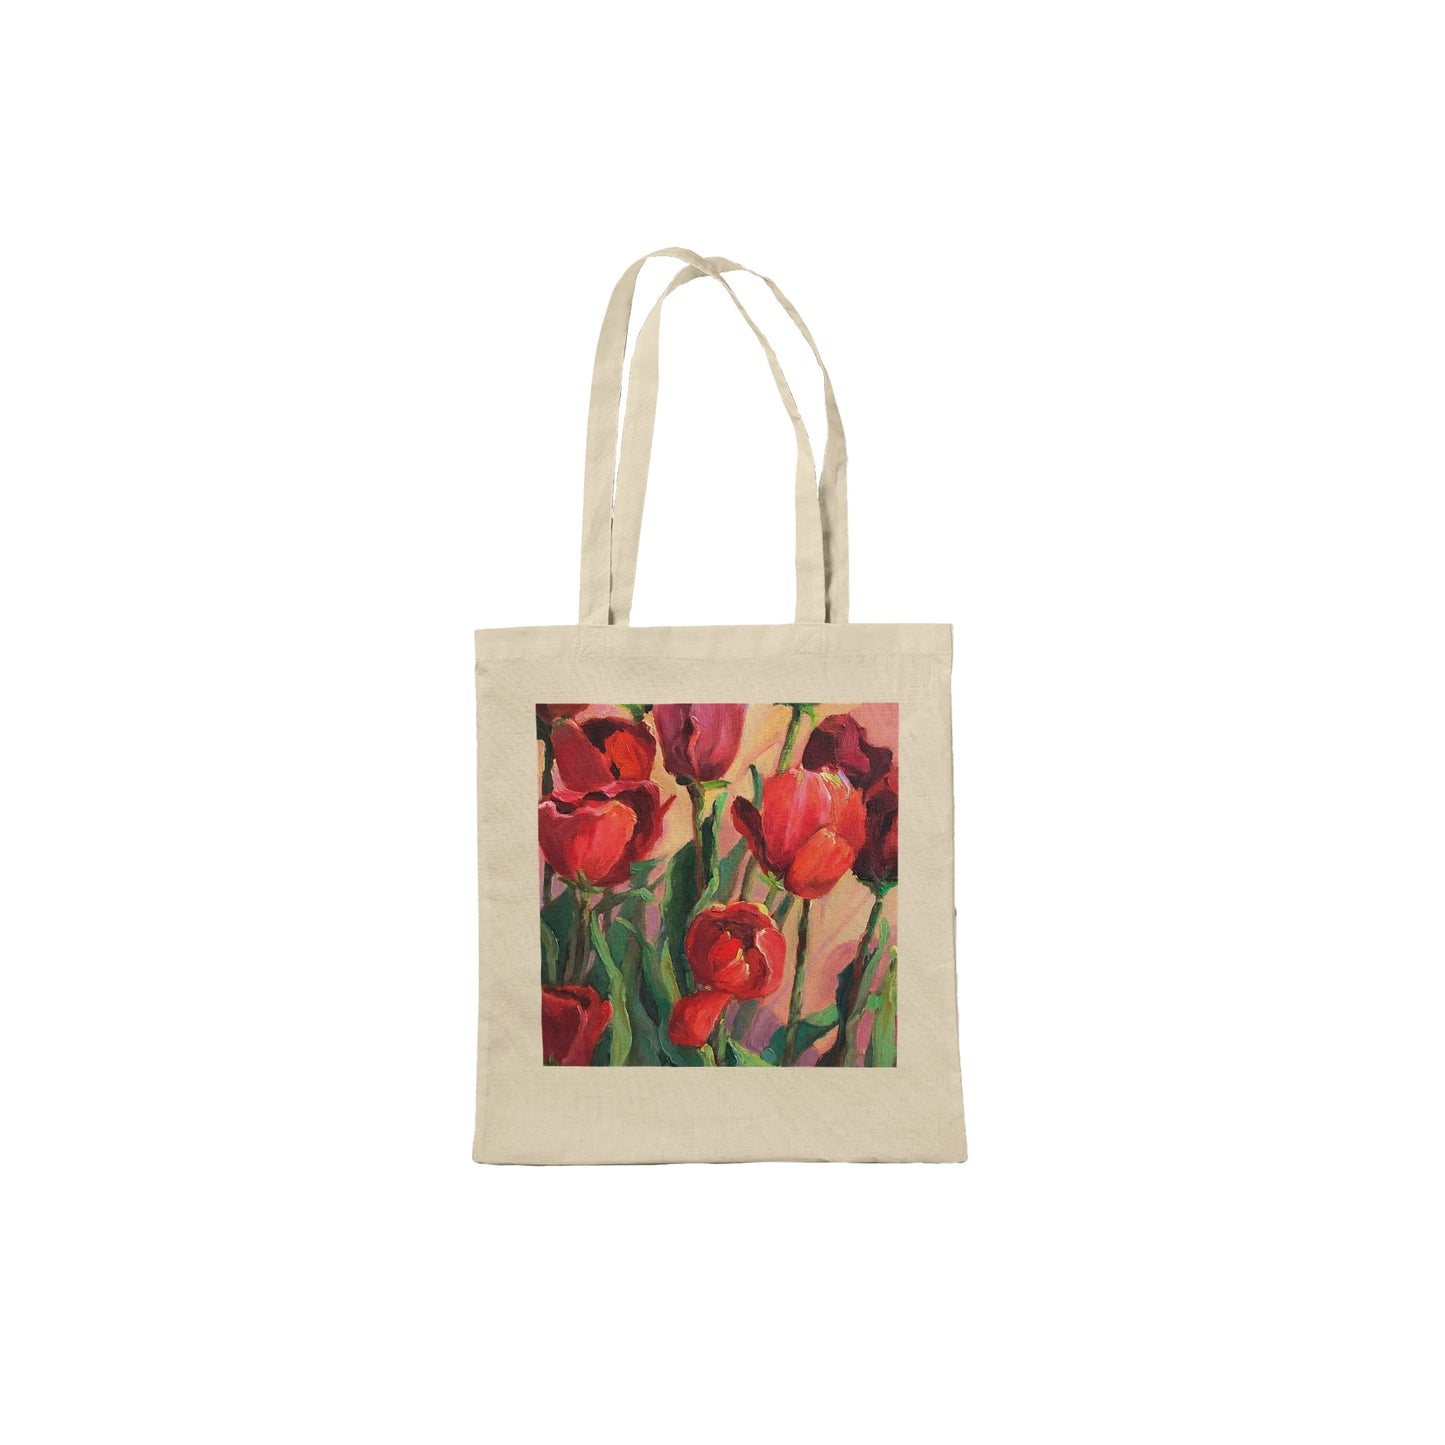 "Tulips" Floral Classic Tote Bag by Barbara Cleary Designs